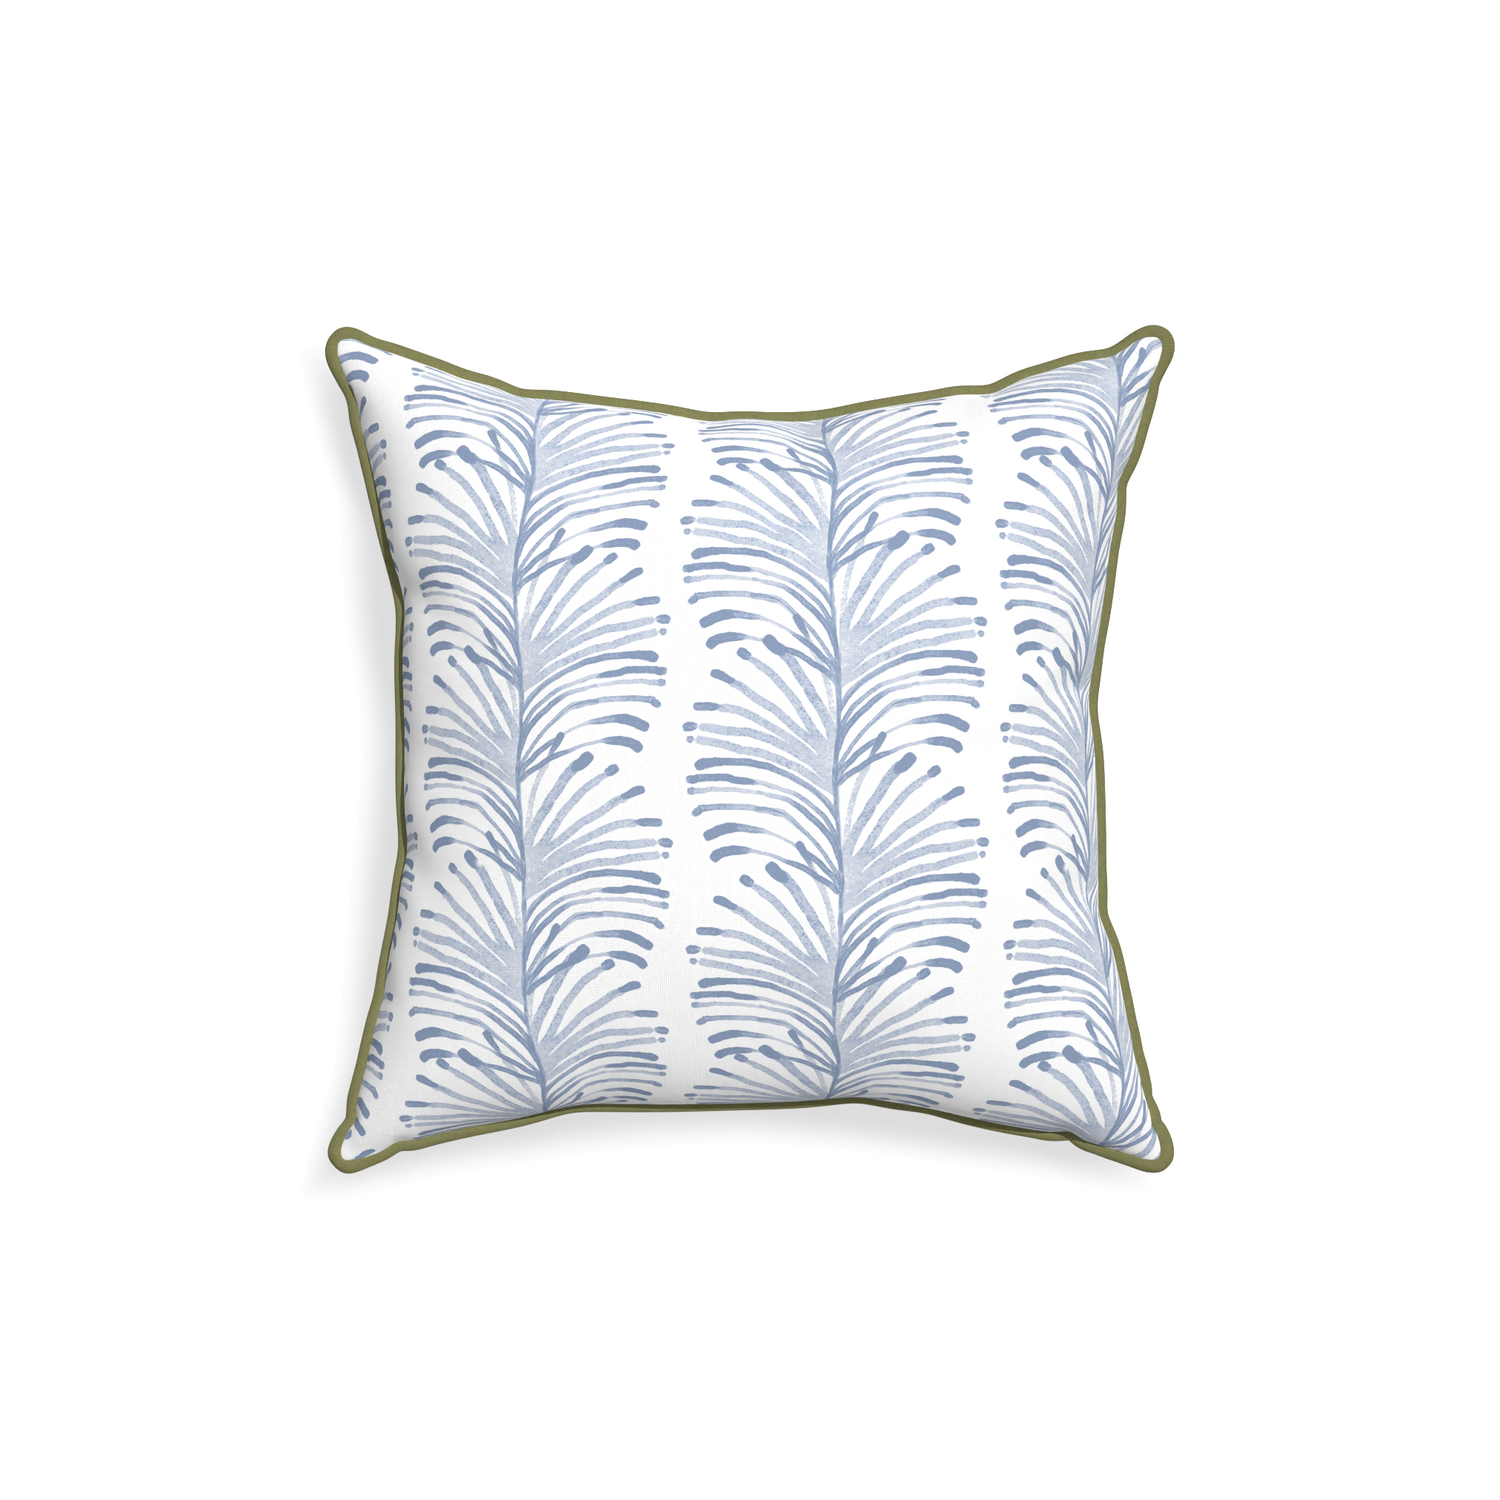 18-square emma sky custom sky blue botanical stripepillow with moss piping on white background